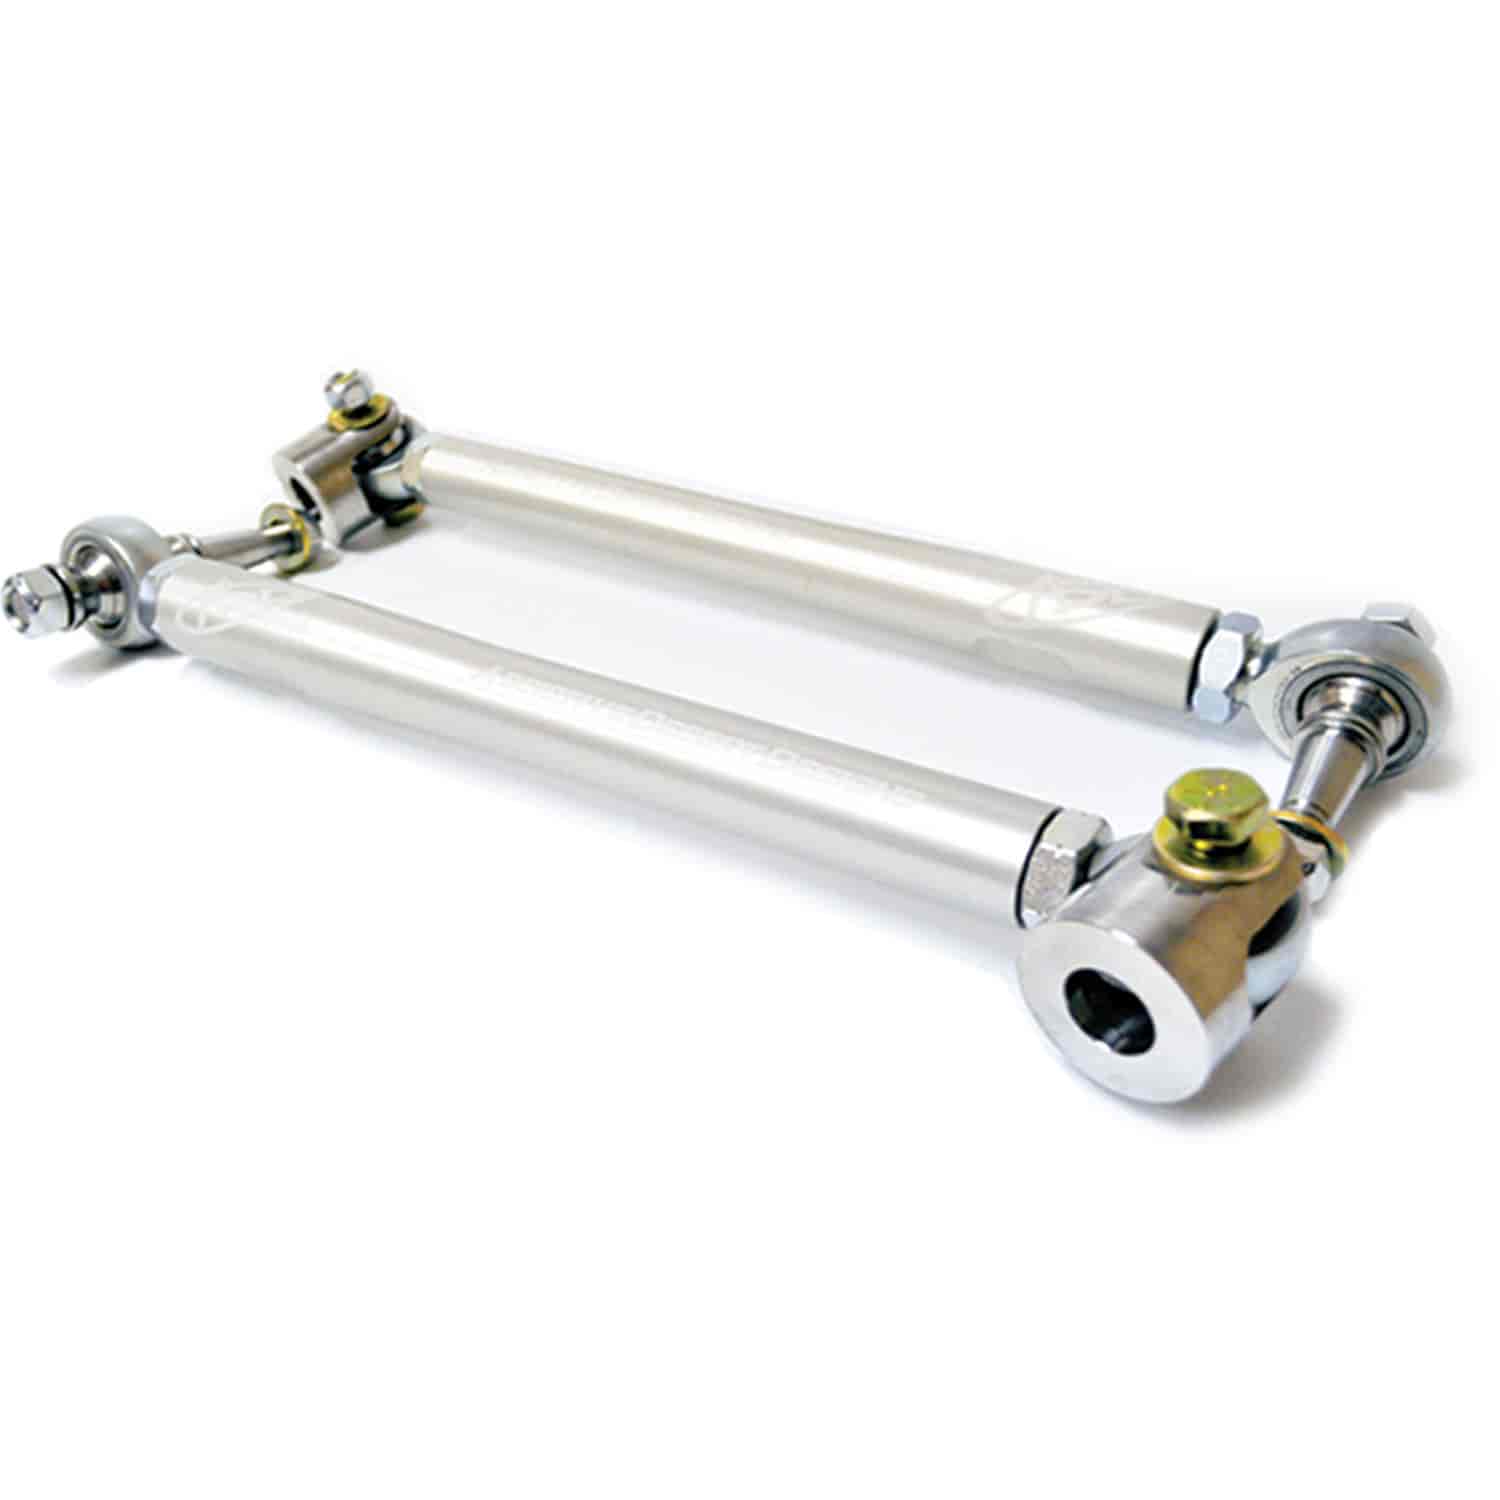 10-14 Ford Raptor aluminum tie rod kit with all hardware and heims in hard annodize color